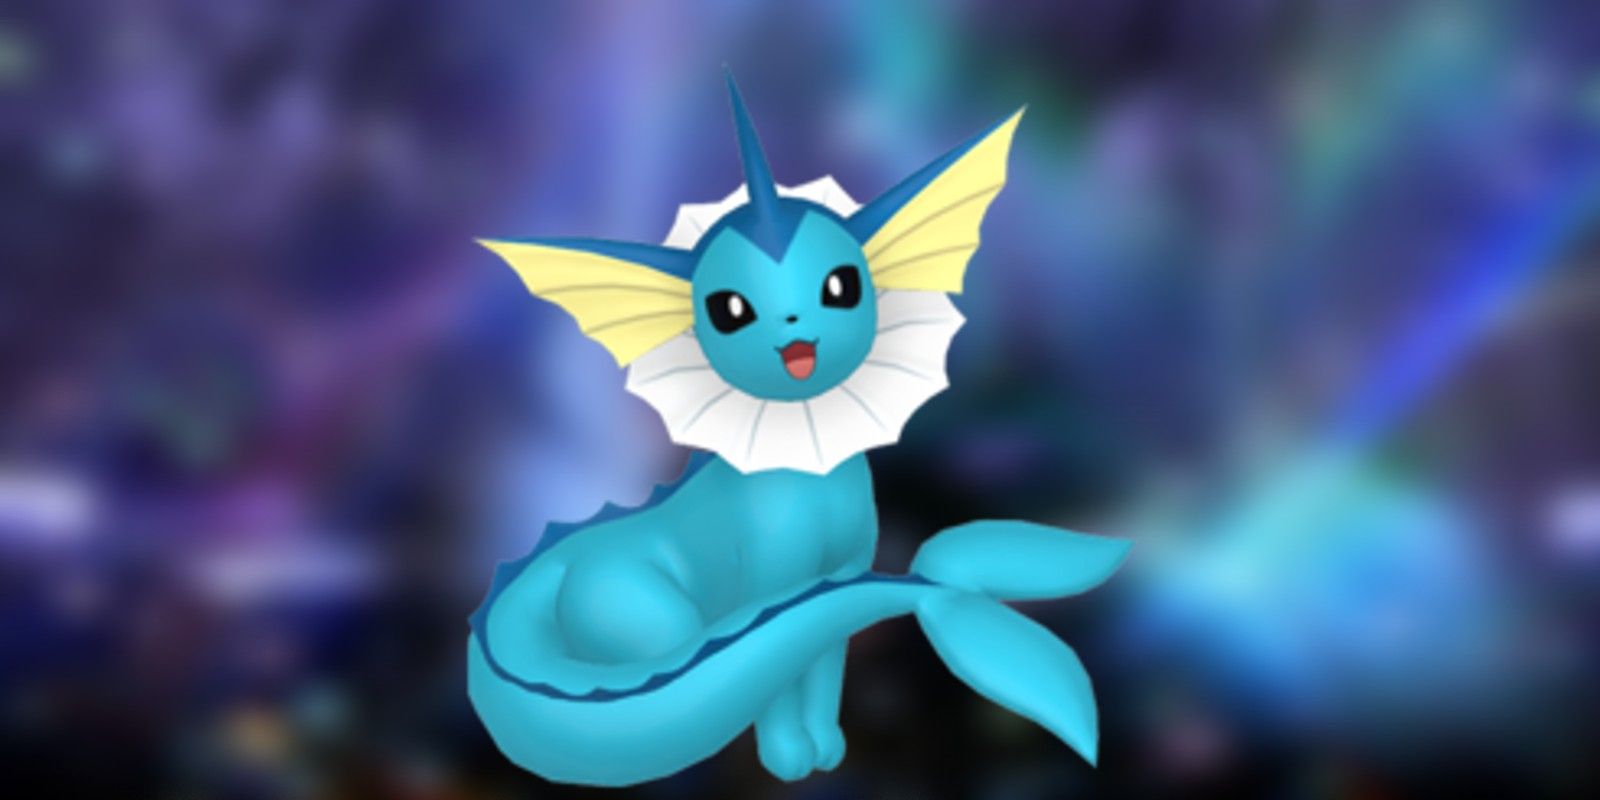 Vaporeon is a projected Pokemon to ace Greninja Tera Raids in Pokemon Scarlet and Violet